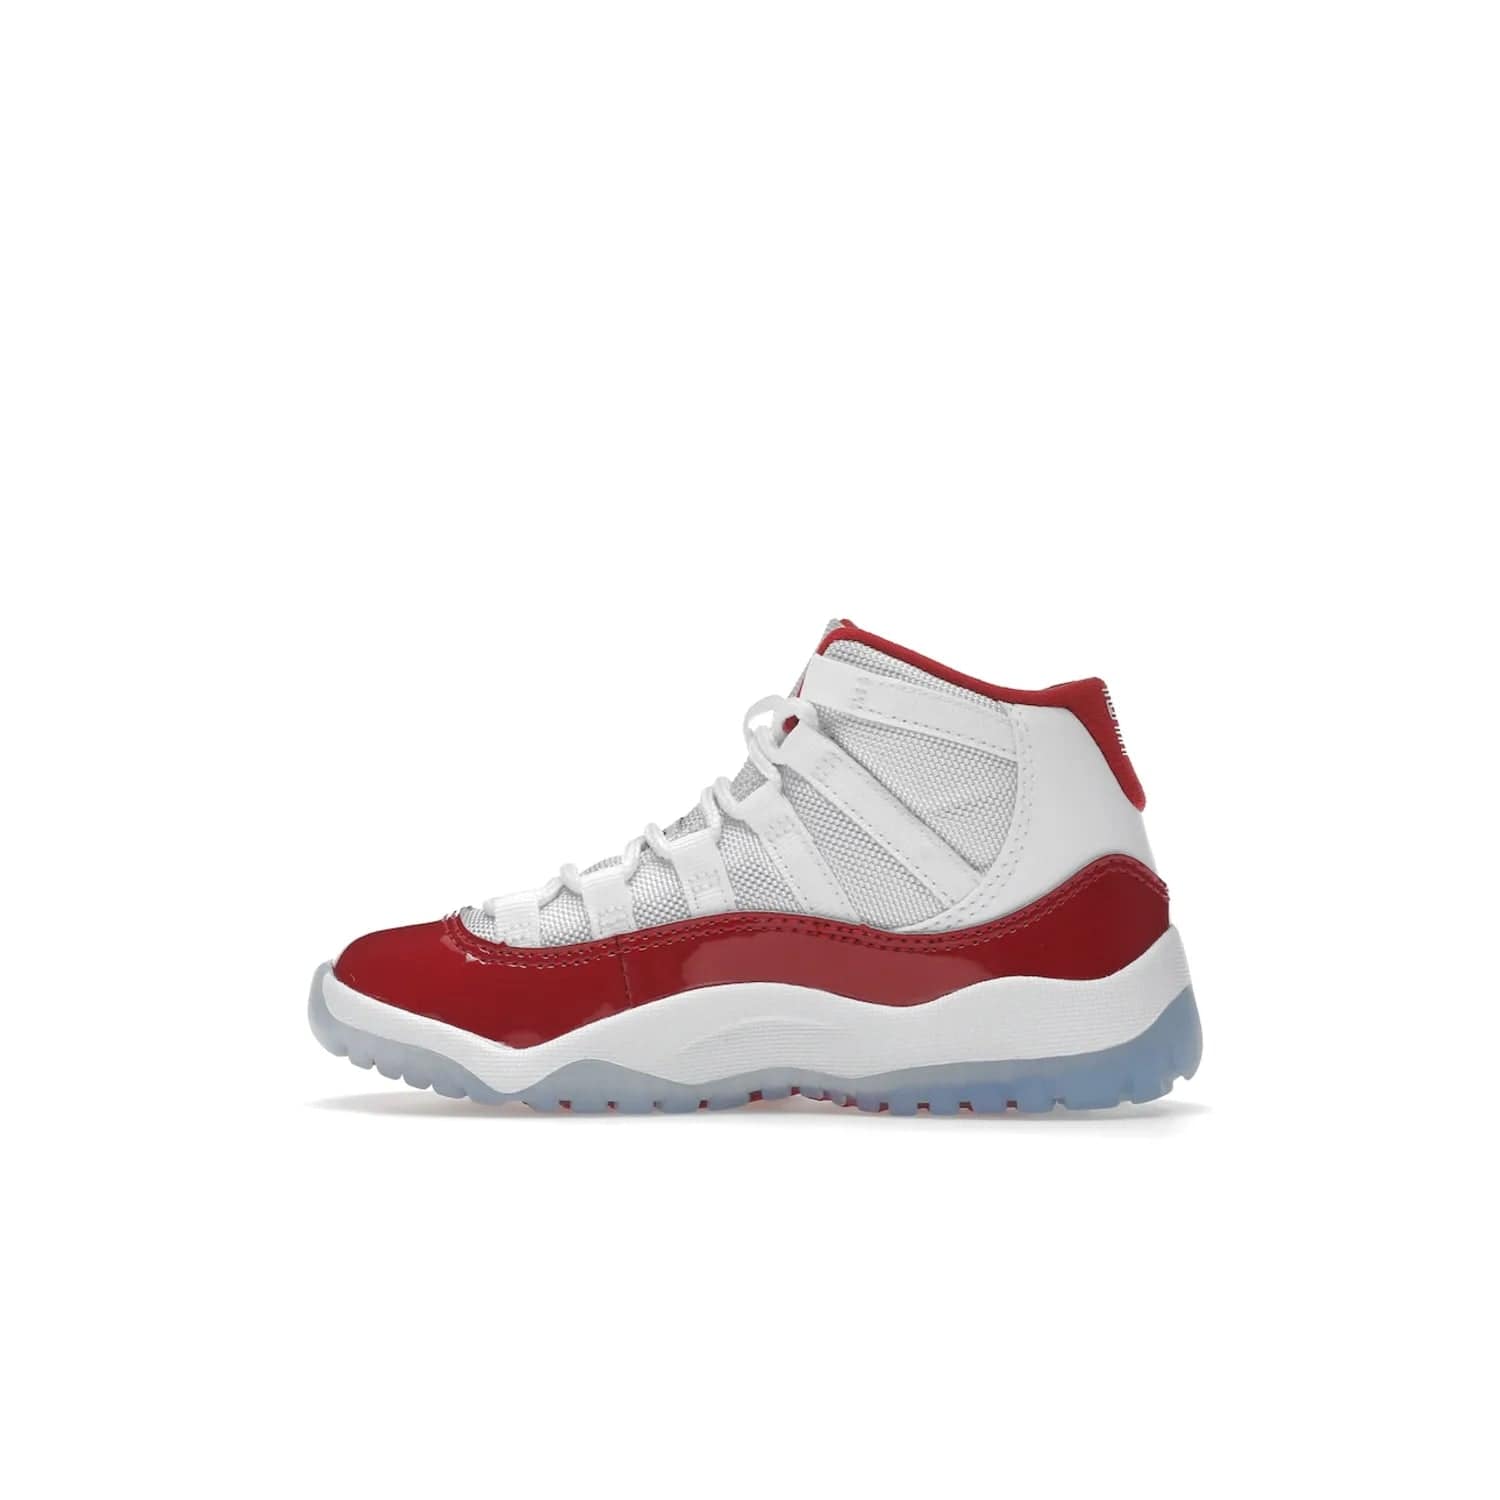 Jordan 11 Retro Cherry (2022) (PS) - Image 20 - Only at www.BallersClubKickz.com - An iconic silhouette with a timeless look, the Air Jordan 11 Retro Cherry 2022 PS features a crisp White, Varsity Red and Black colorway. The upper is made of ballistic mesh, a red patent leather mudguard, '23' branding and white Phylon midsole. Get optimal cushioning and comfort on December 10th, 2022. Don't miss out.